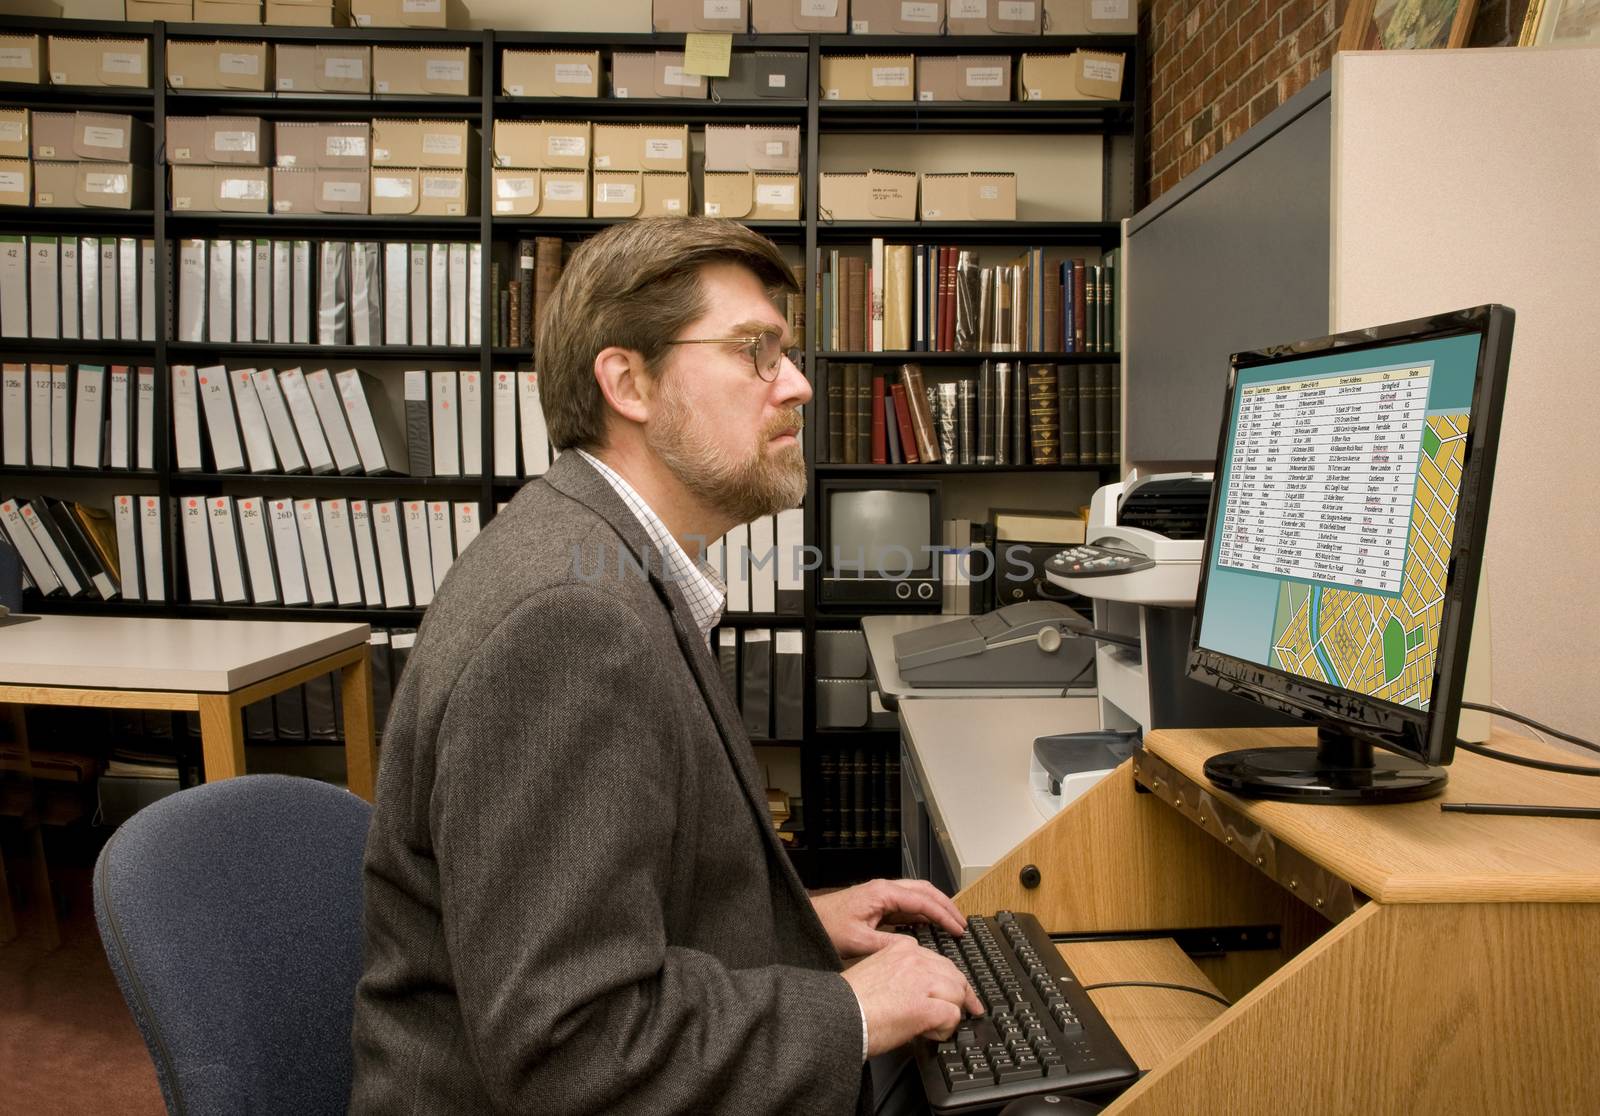 Researcher searching a computer database archive by Balefire9